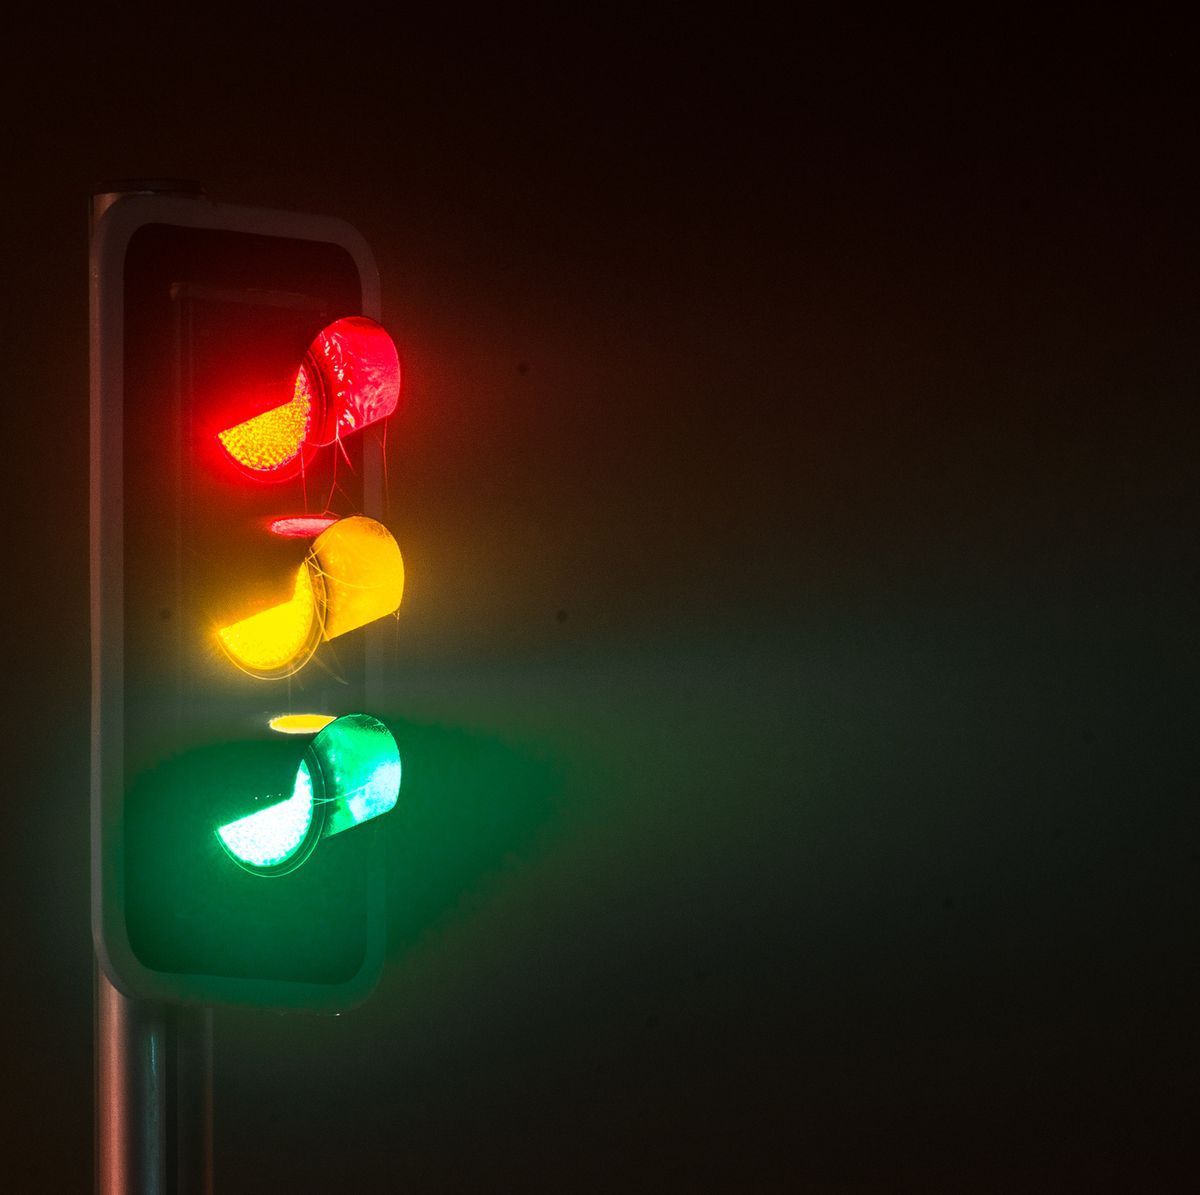 How Traffic Lights Work - Everything You Need to Know About